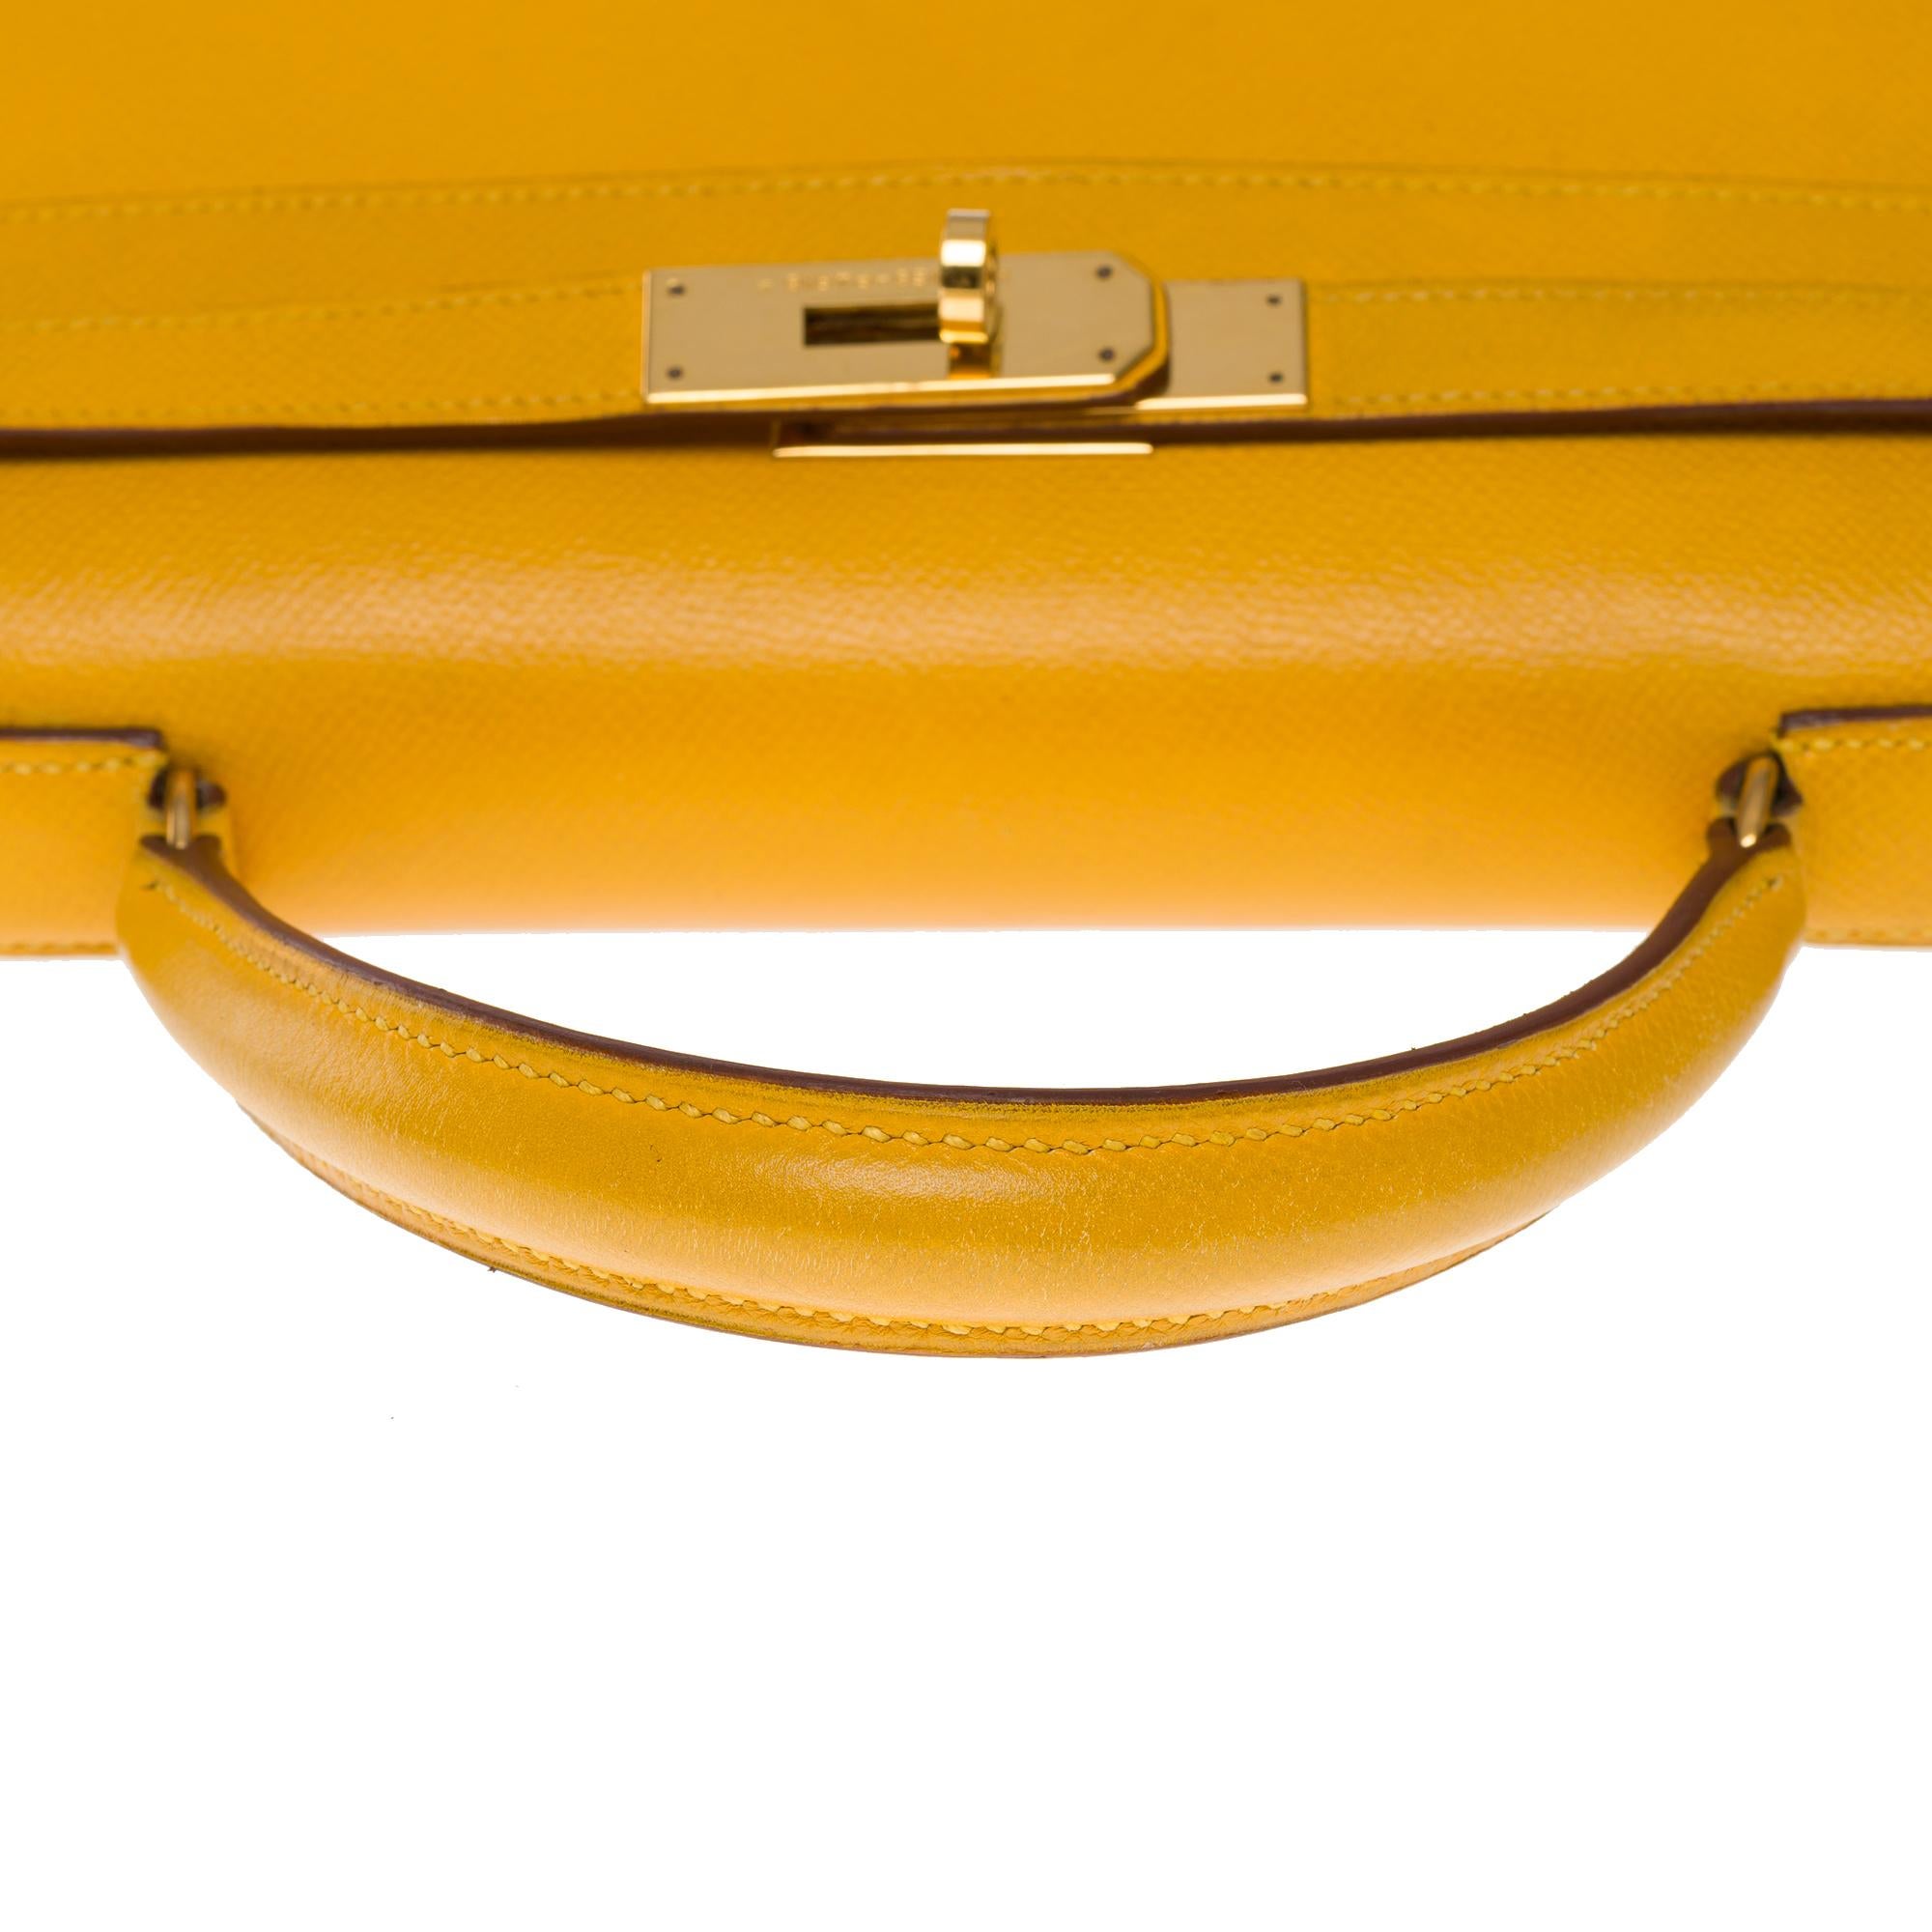 Bright Hermès Kelly 28 sellier handbag strap in Courchevel Yellow leather, GHW 4